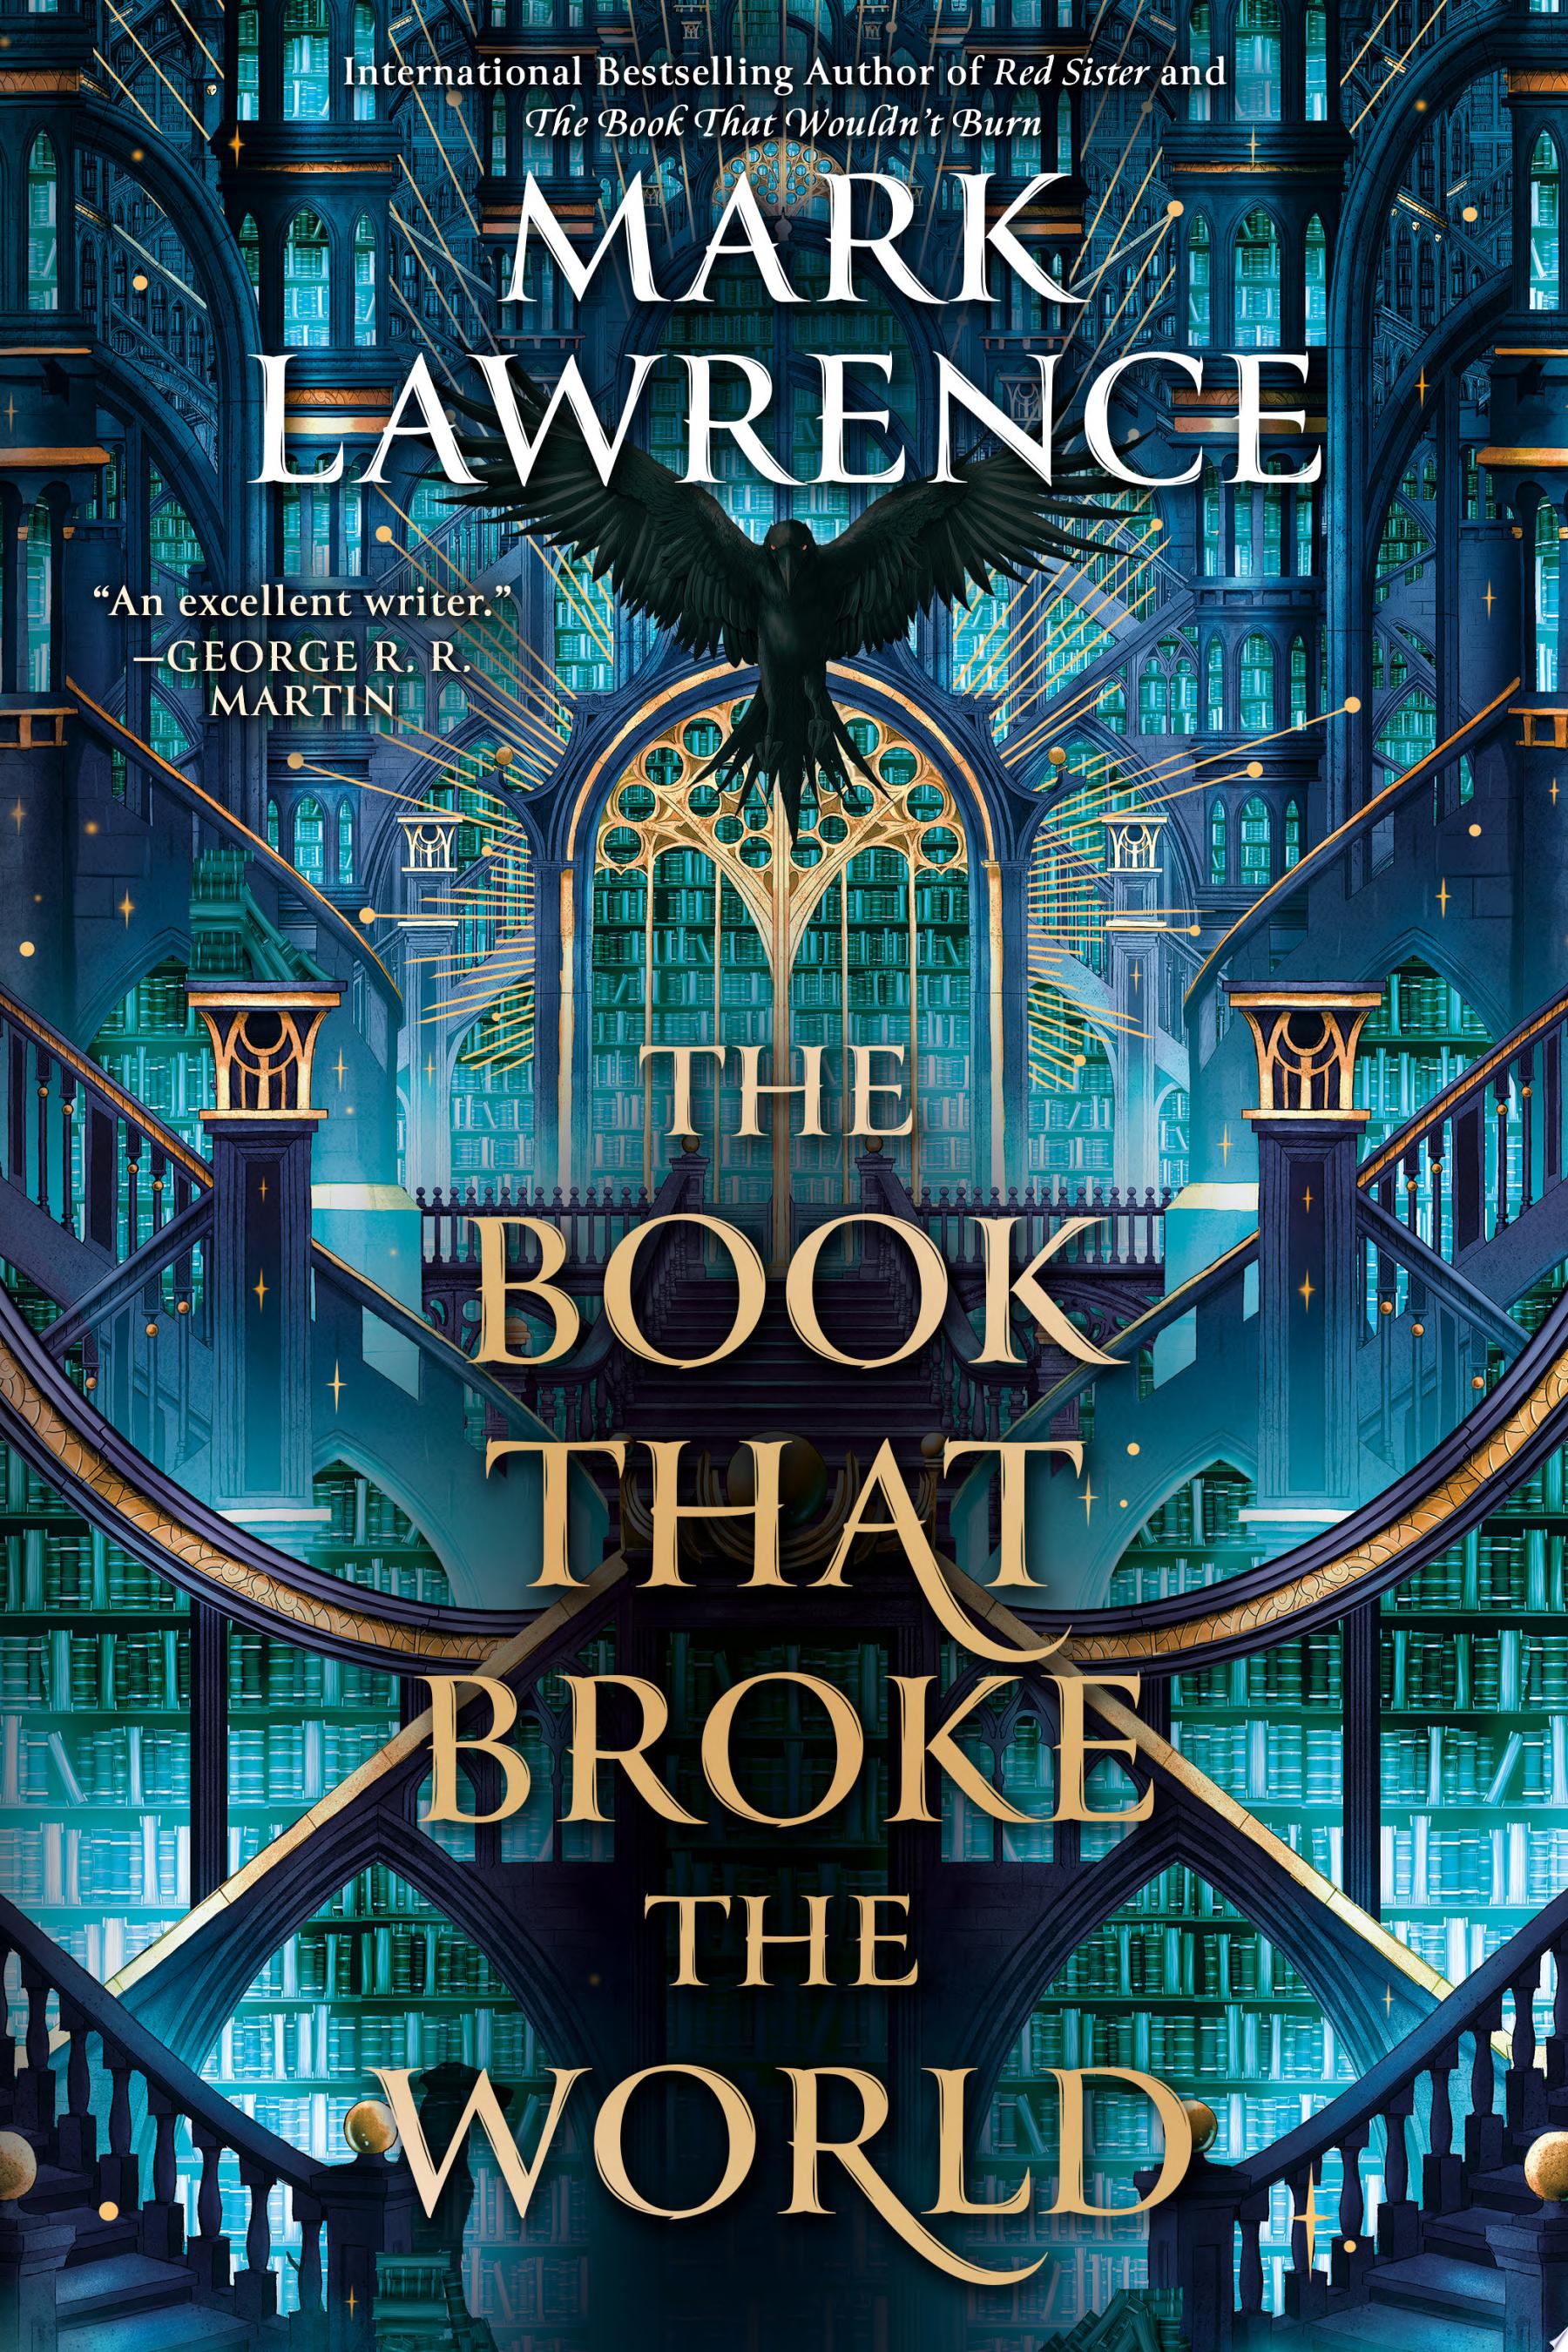 Image for "The Book That Broke the World"